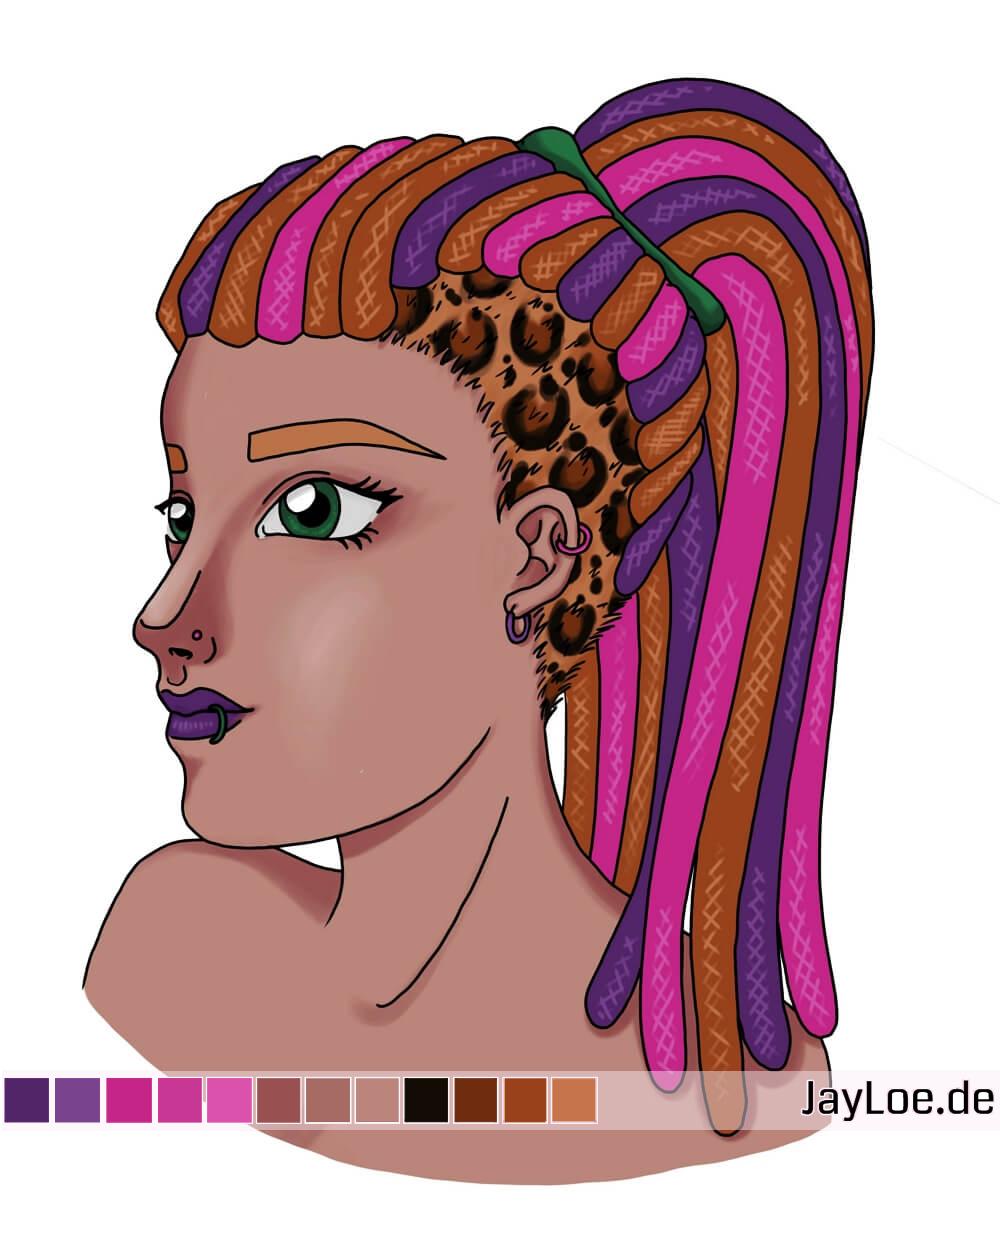 Punky girl with leo pattern hair and dreads